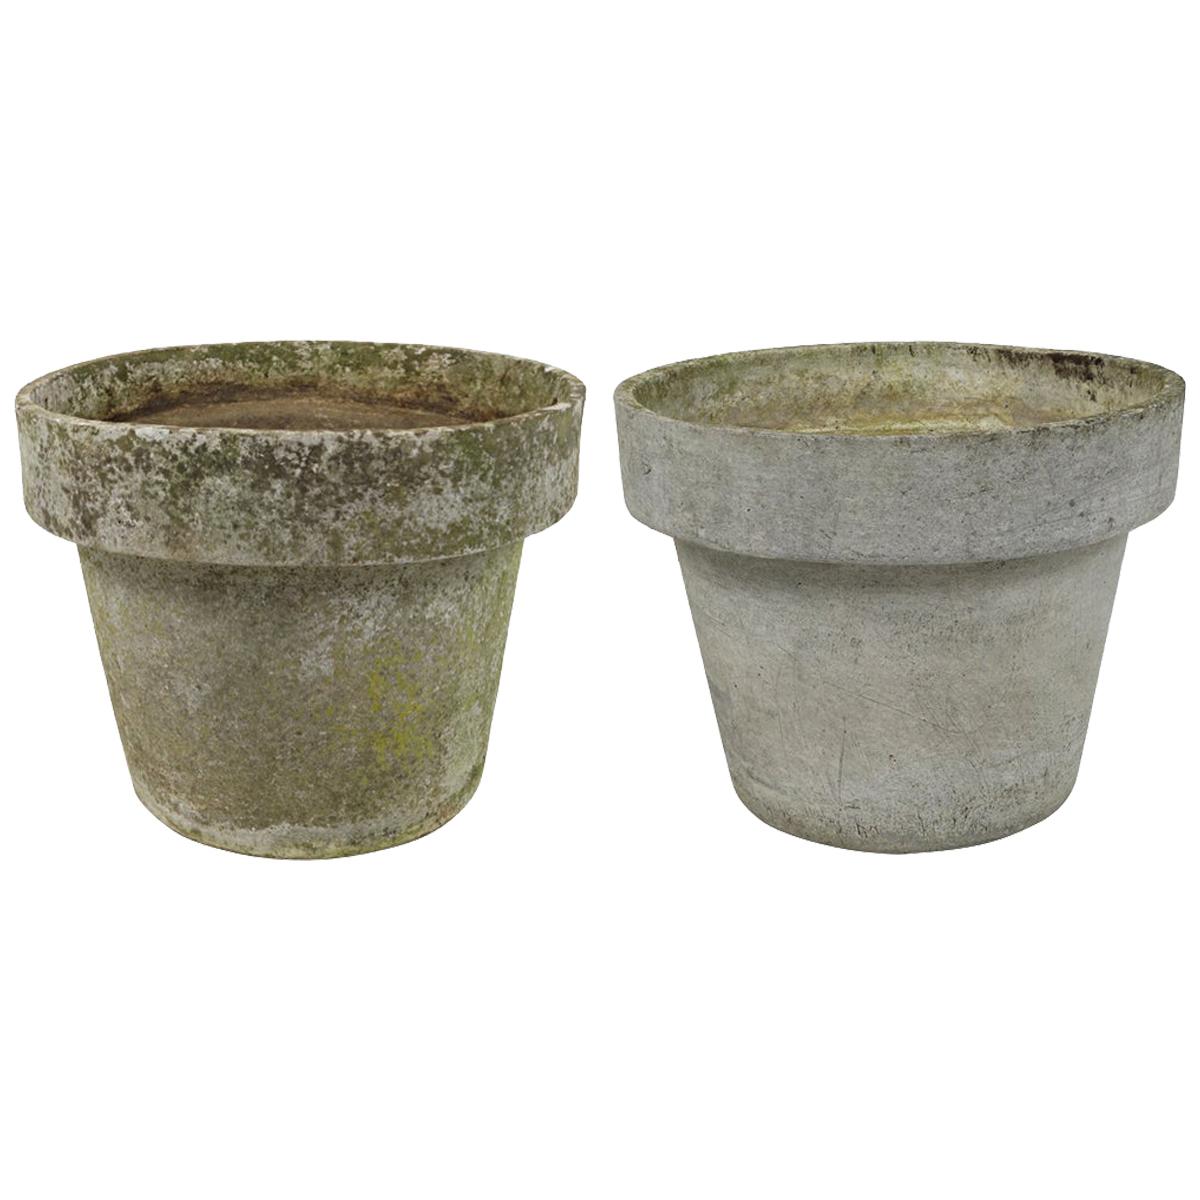 Pair of Large Planters in the Shape of Flower Pots by Willy Guhl for Eternit